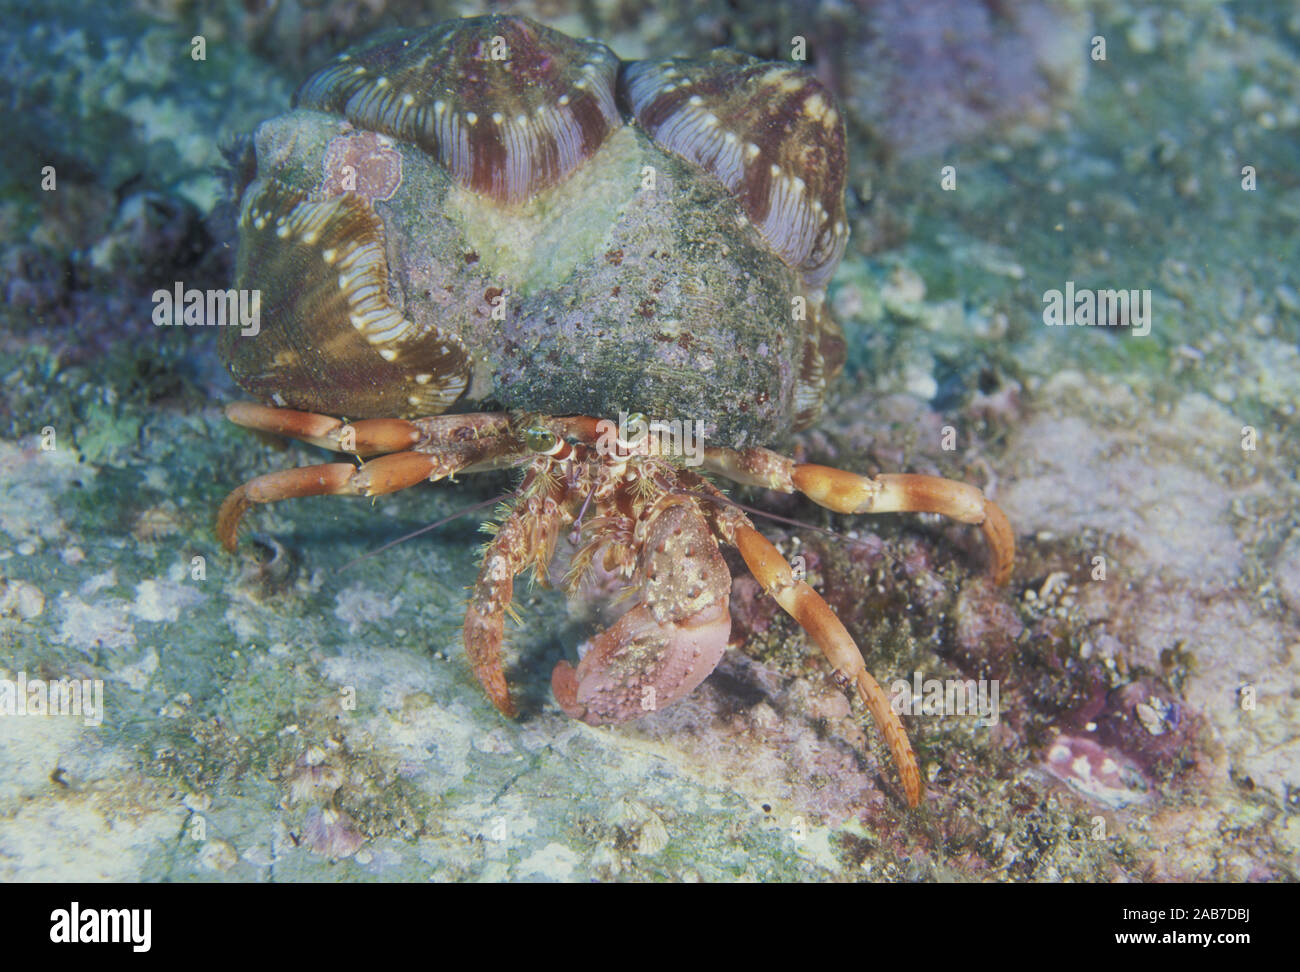 Hermit crab (Dardanus sp.), carrying Sea anemone (Calliactis sp.) on its  shell in commensal relationship. These anemones are only found with crabs.  So Stock Photo - Alamy